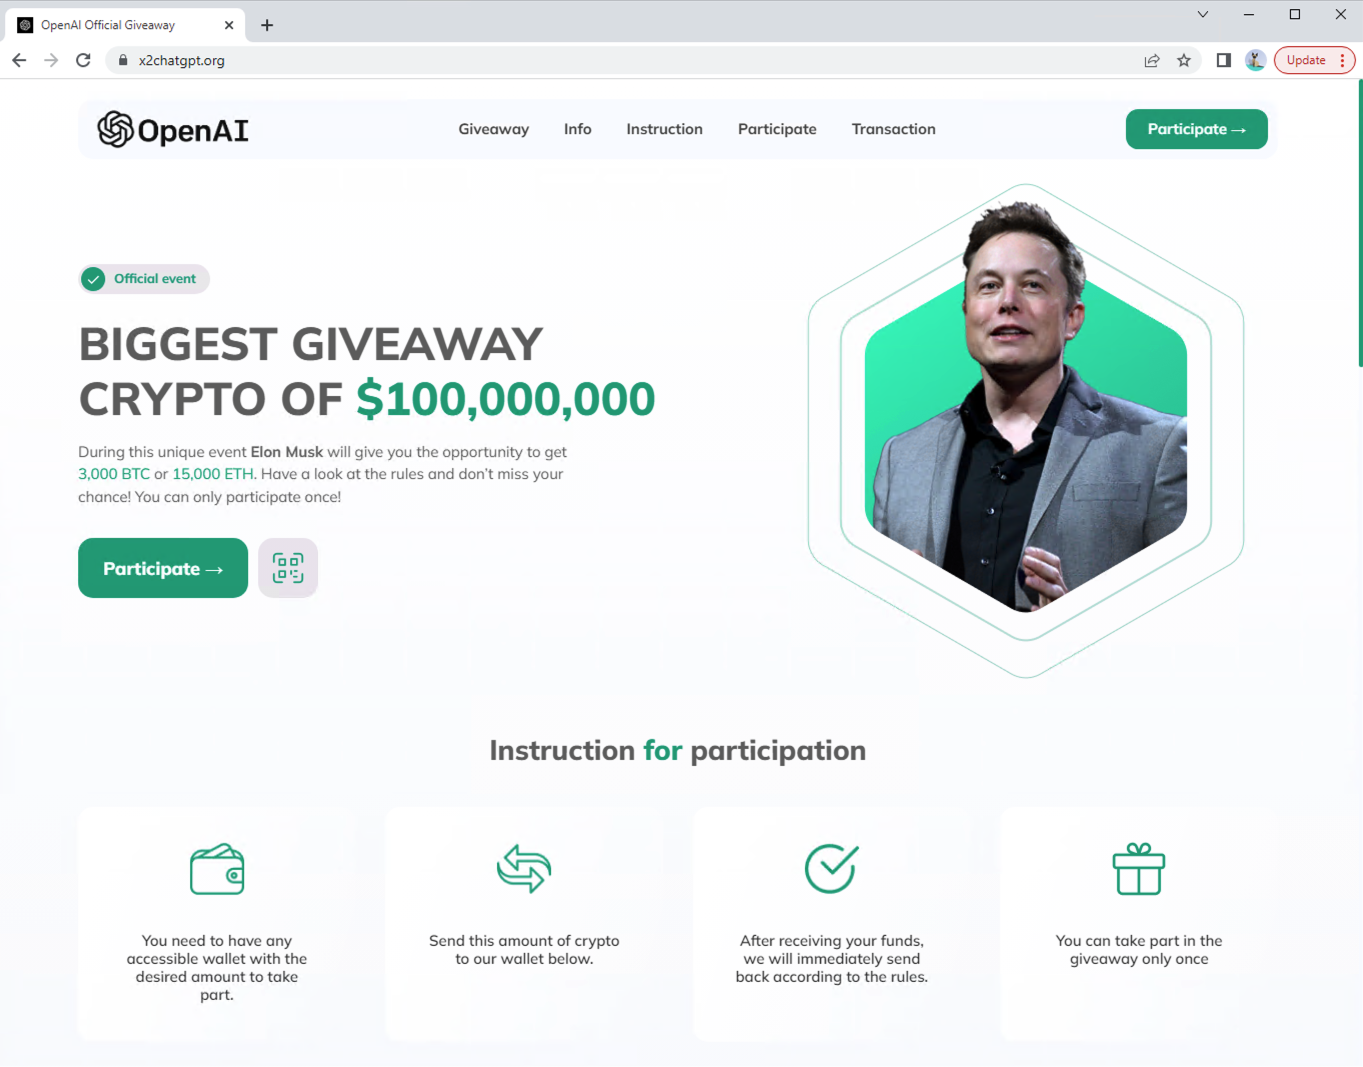 Image 6 is a screenshot of a cryptocurrency scam that mimics the OpenAI website. It has a picture of Elon Musk with the title “biggest giveaway crypto of $100 million.” There's a button for endusers to participate as well as instructions for participation.